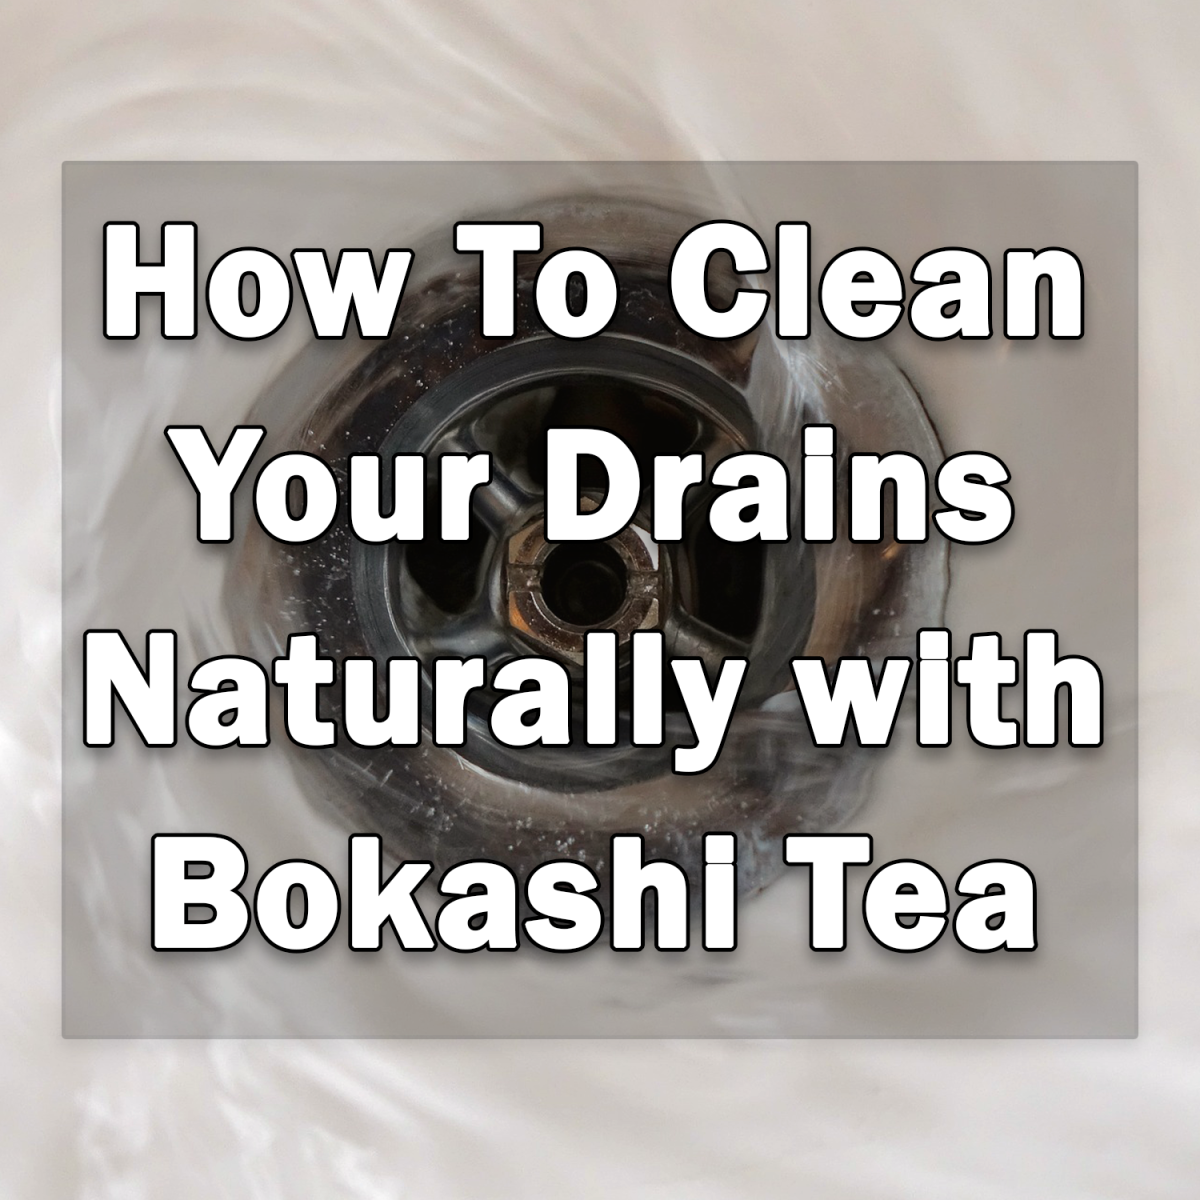 https://images.saymedia-content.com/.image/t_share/MTgzNTA4NTQ1NDM2NjU2Njc4/how-to-clean-your-drains-naturally-with-bokashi-tea.png